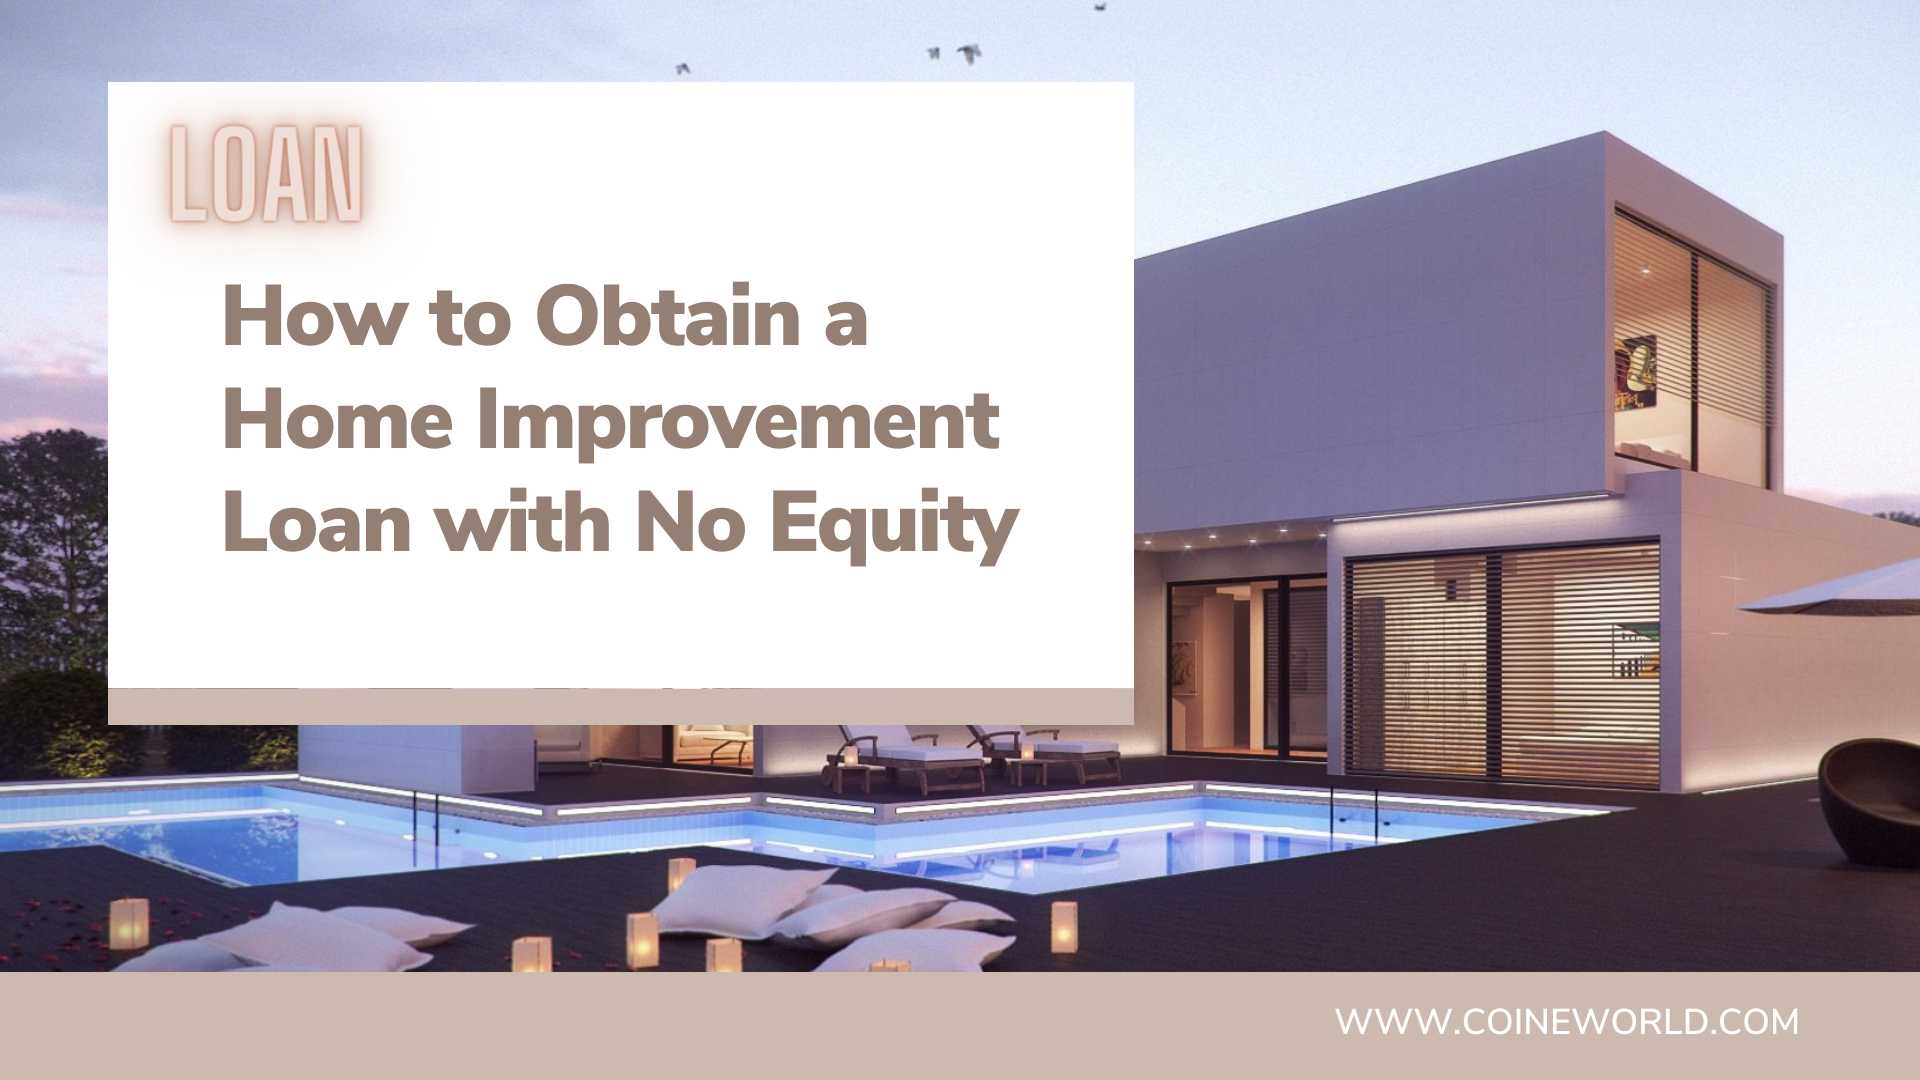 How to Obtain a Home Improvement Loan with No Equity